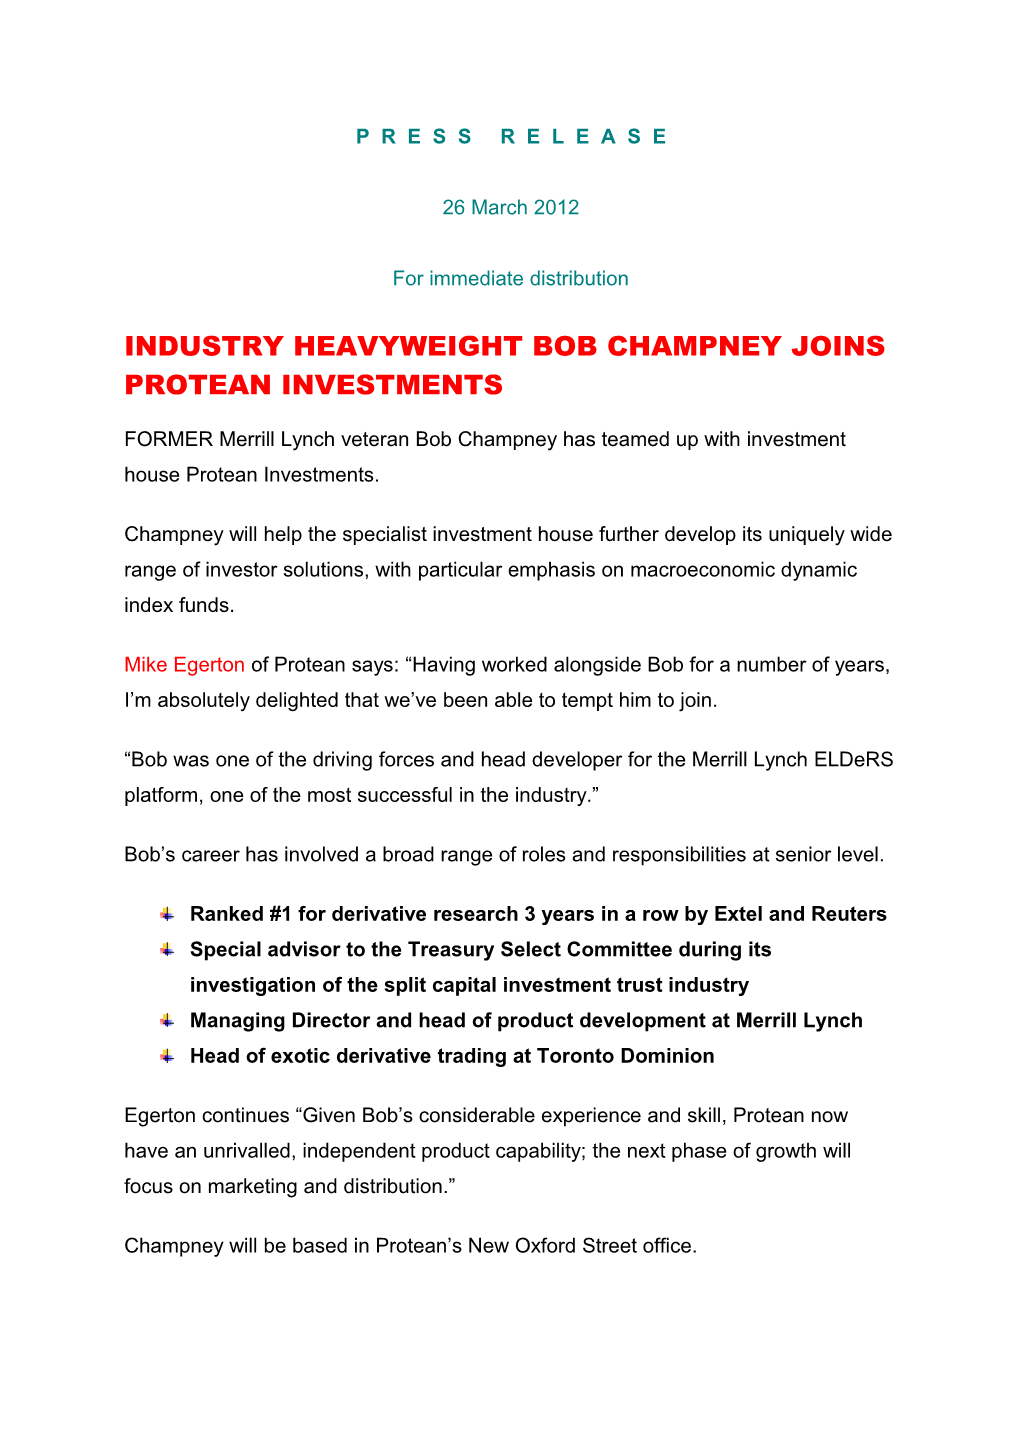 Industry Heavyweight Bob Champney Joins Protean Investments